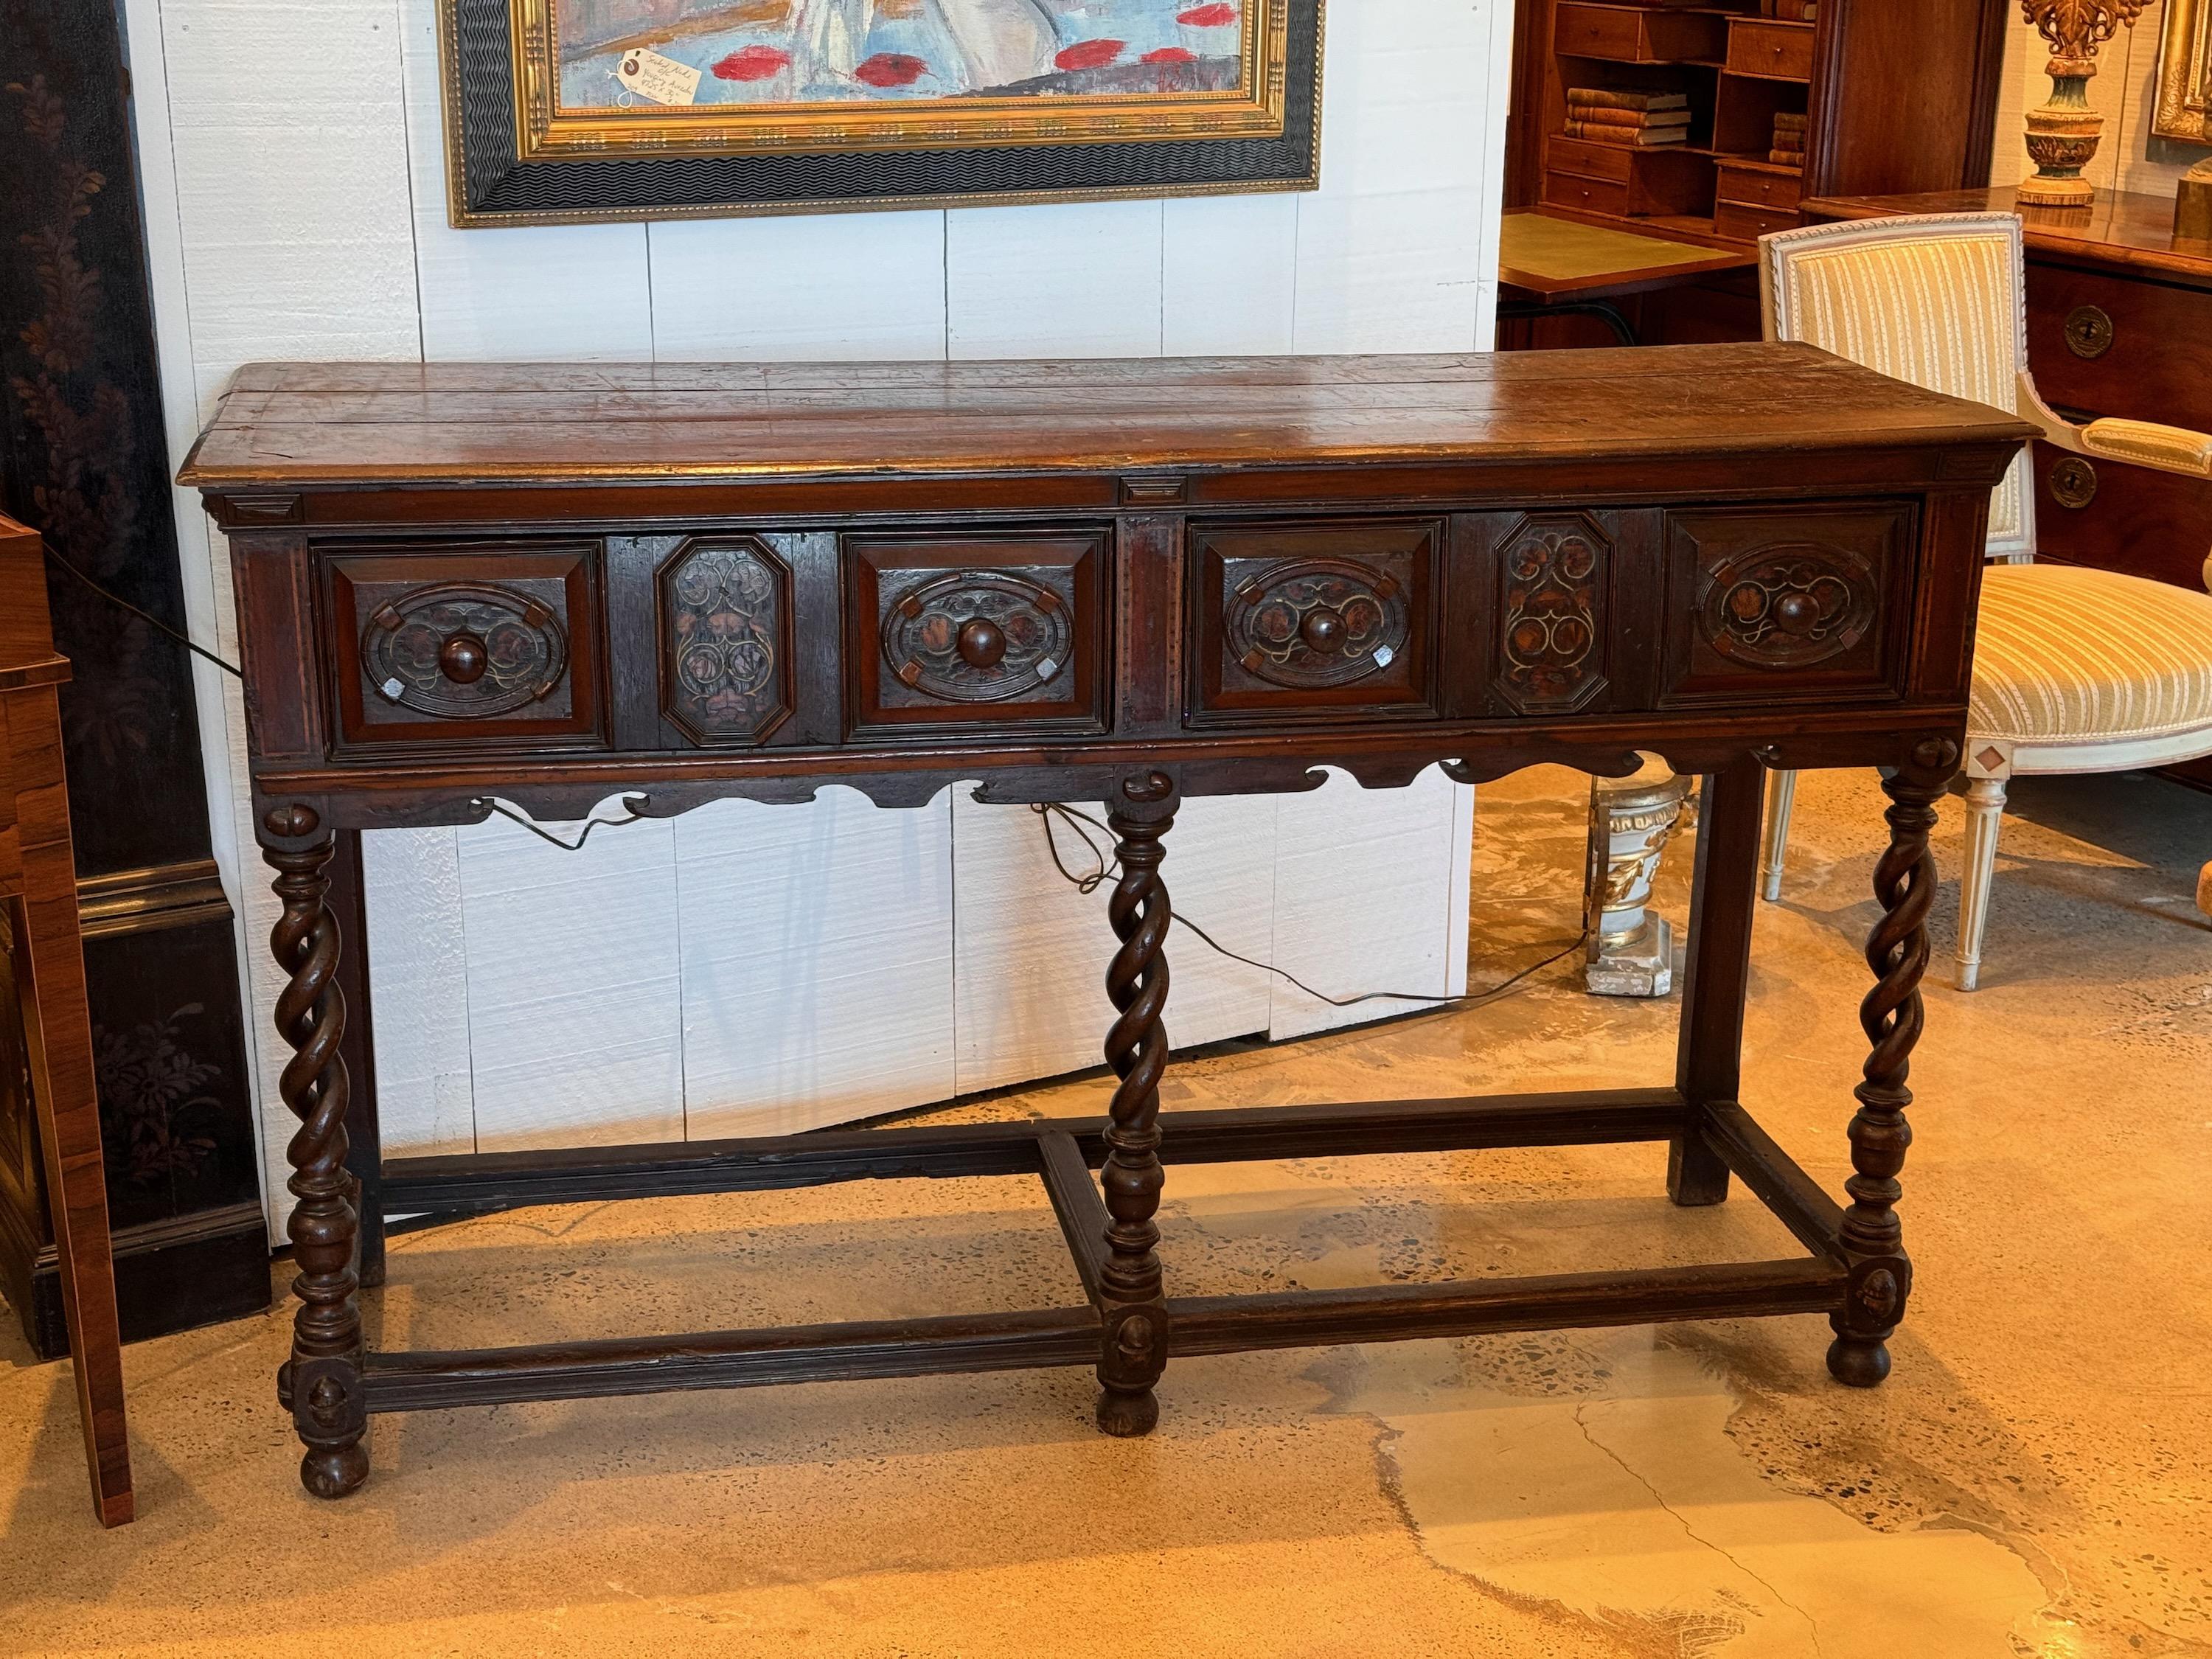 This is a beautiful inlaid dresser base. They make great hall consoles.